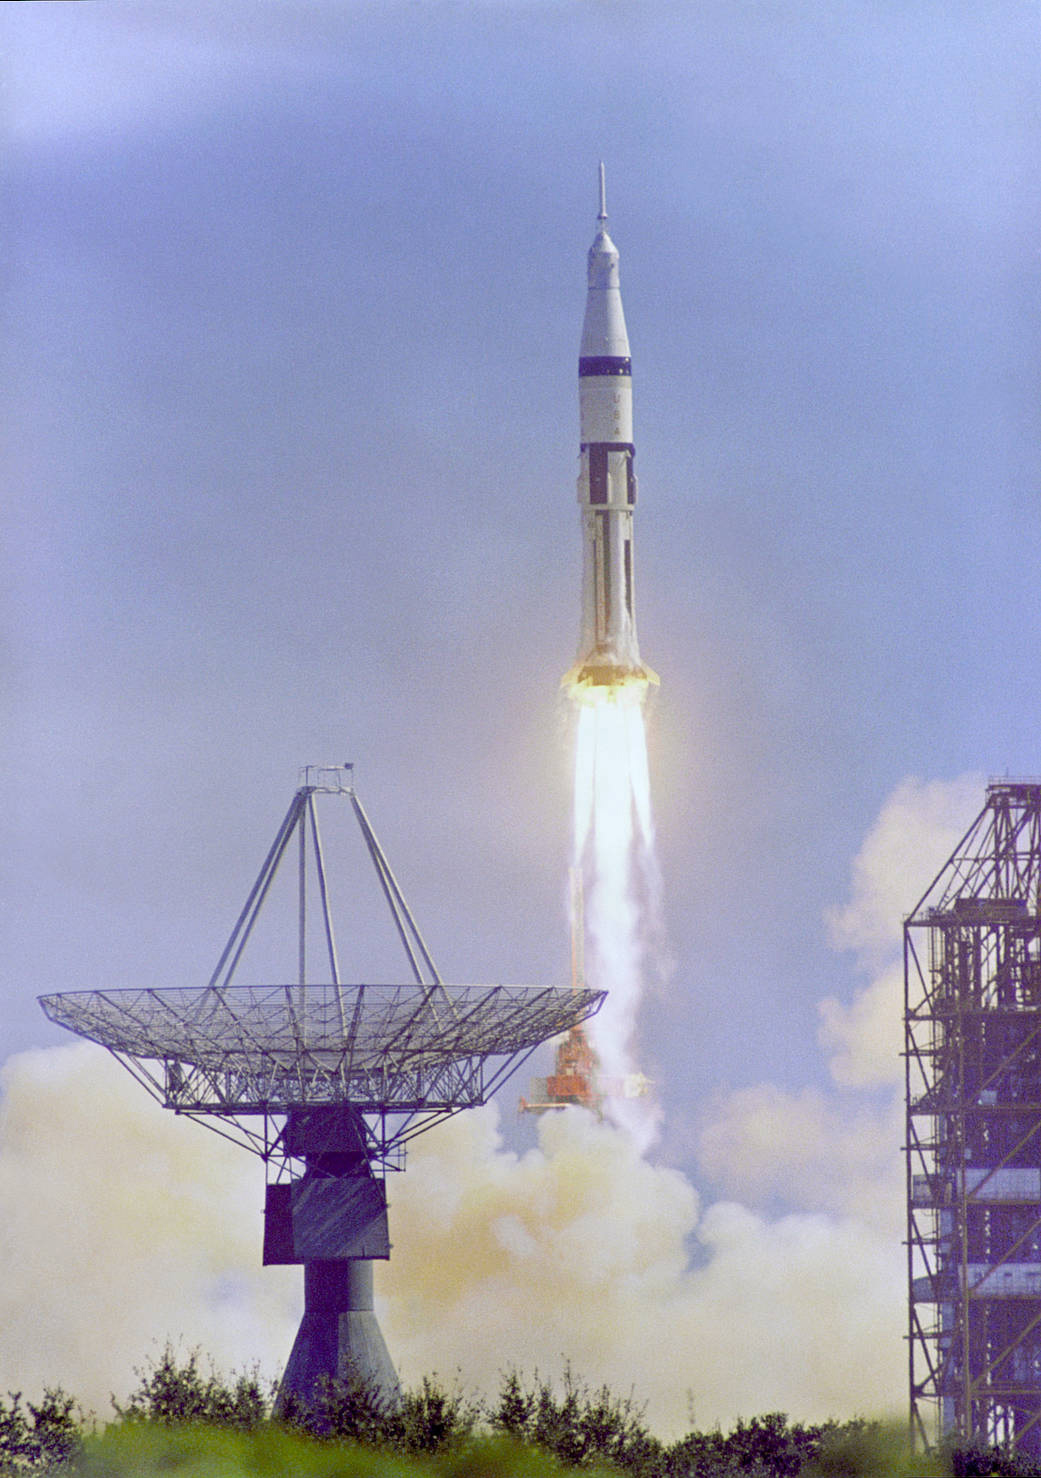 Apollo 7 spacecraft launching with large antenna in foreground